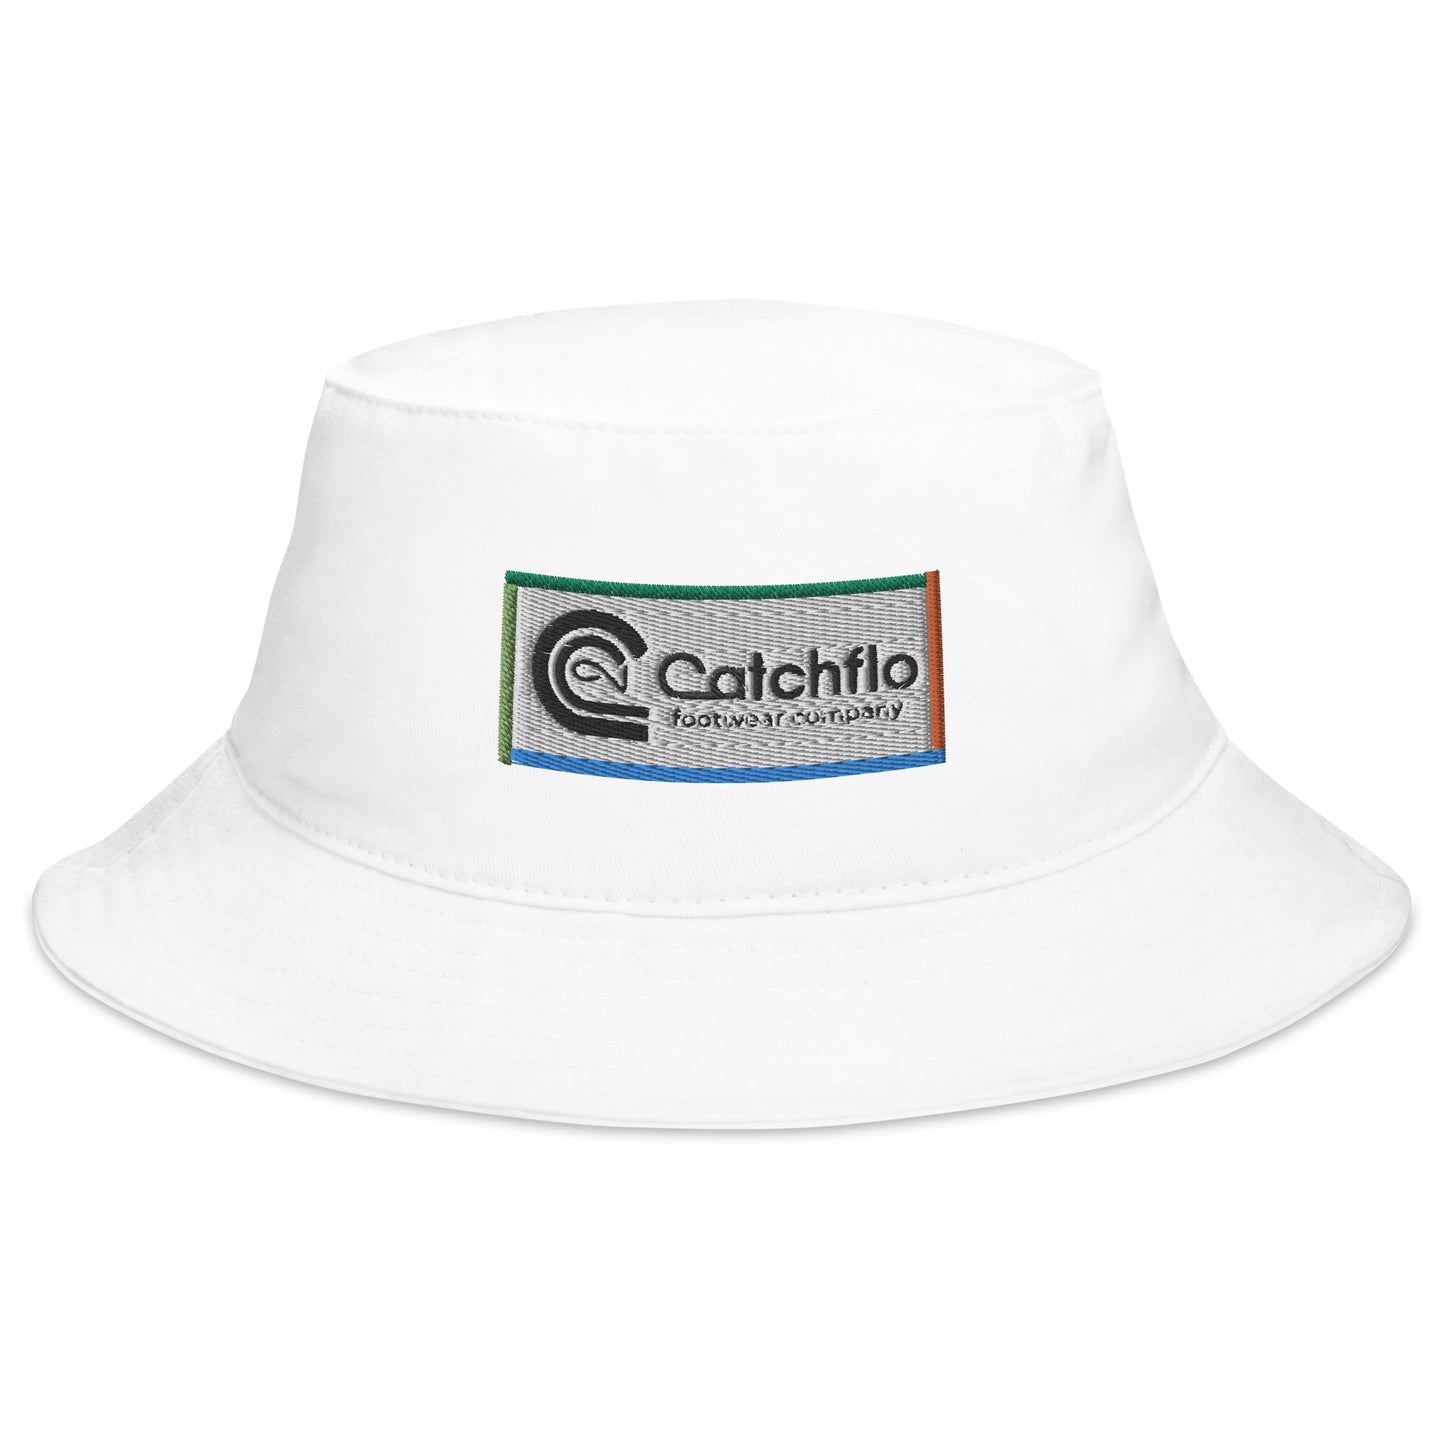 Catchflo Footwear Company Bucket Hat (3 color choices)